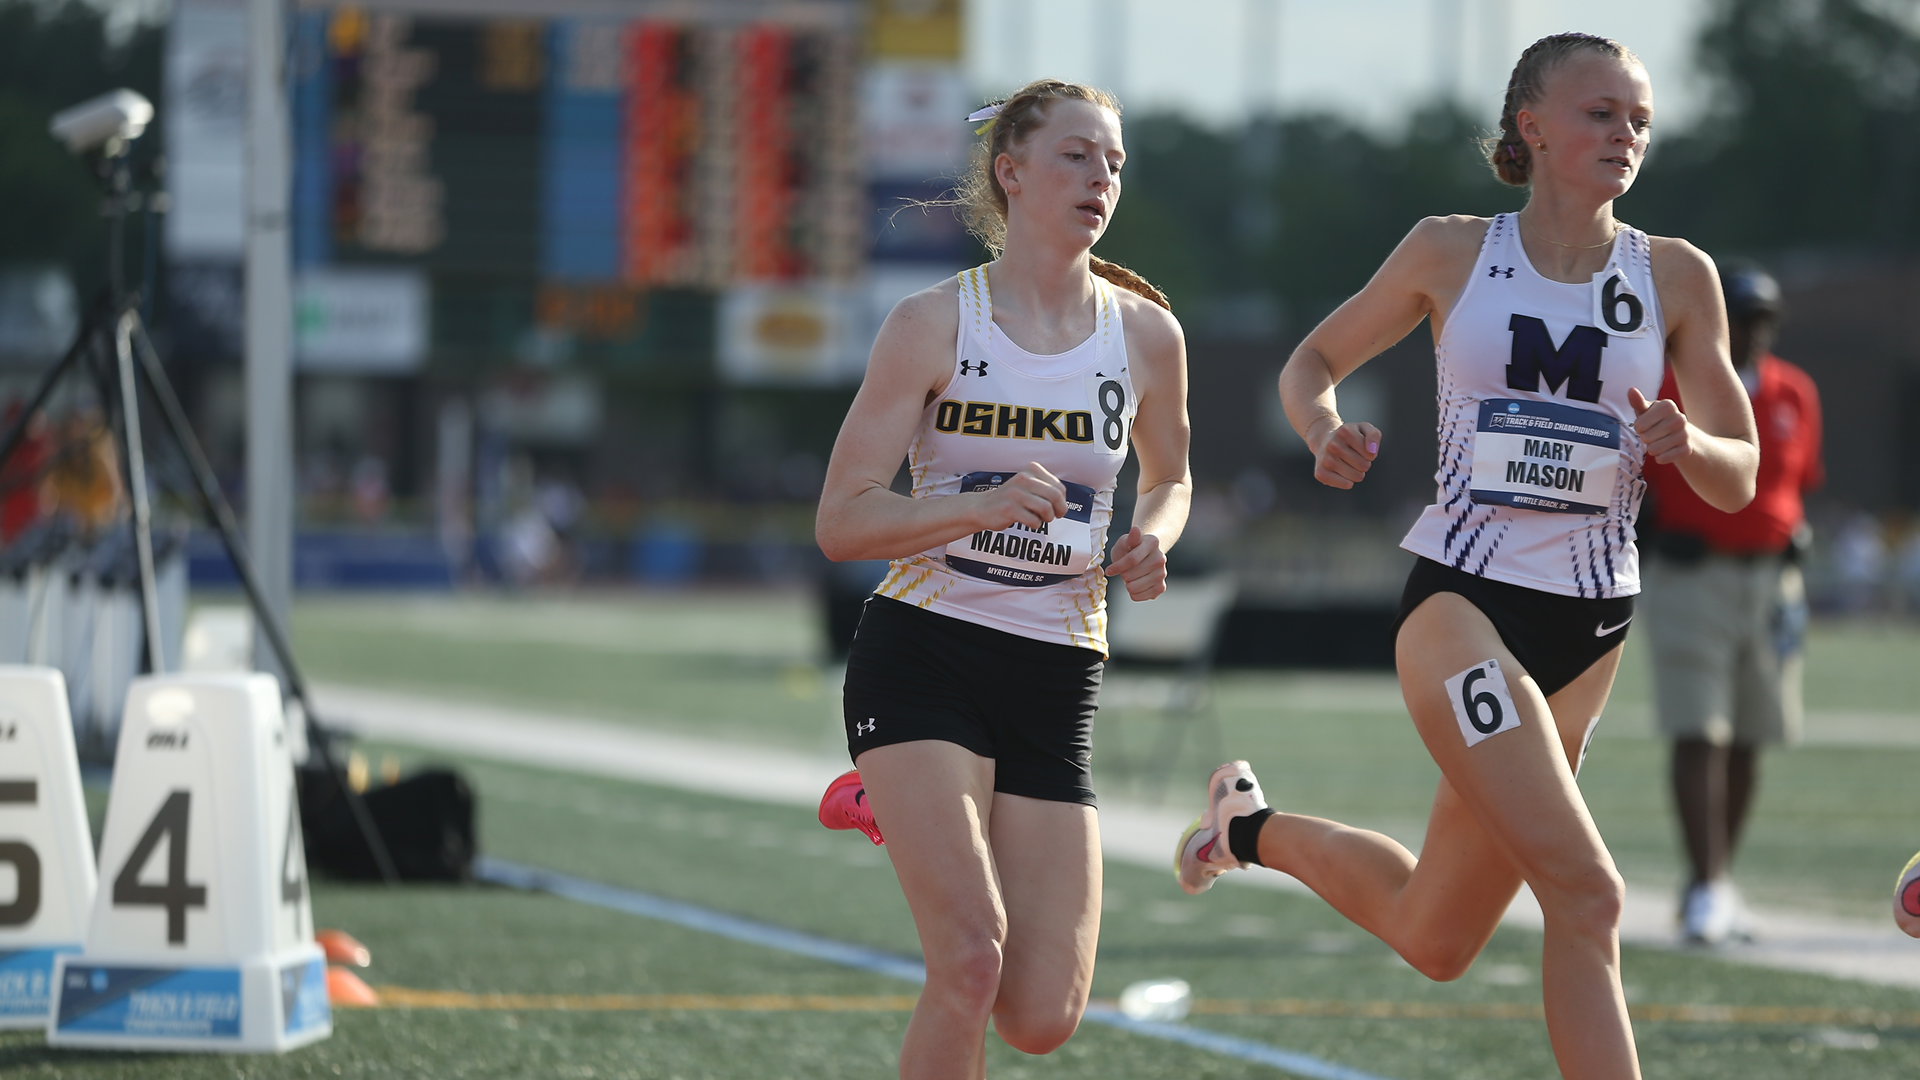 Cyna Madigan earned her second 800-meter run All-America medal with a sixth place time of 2:10.99. Photo Credit: D3photography.com